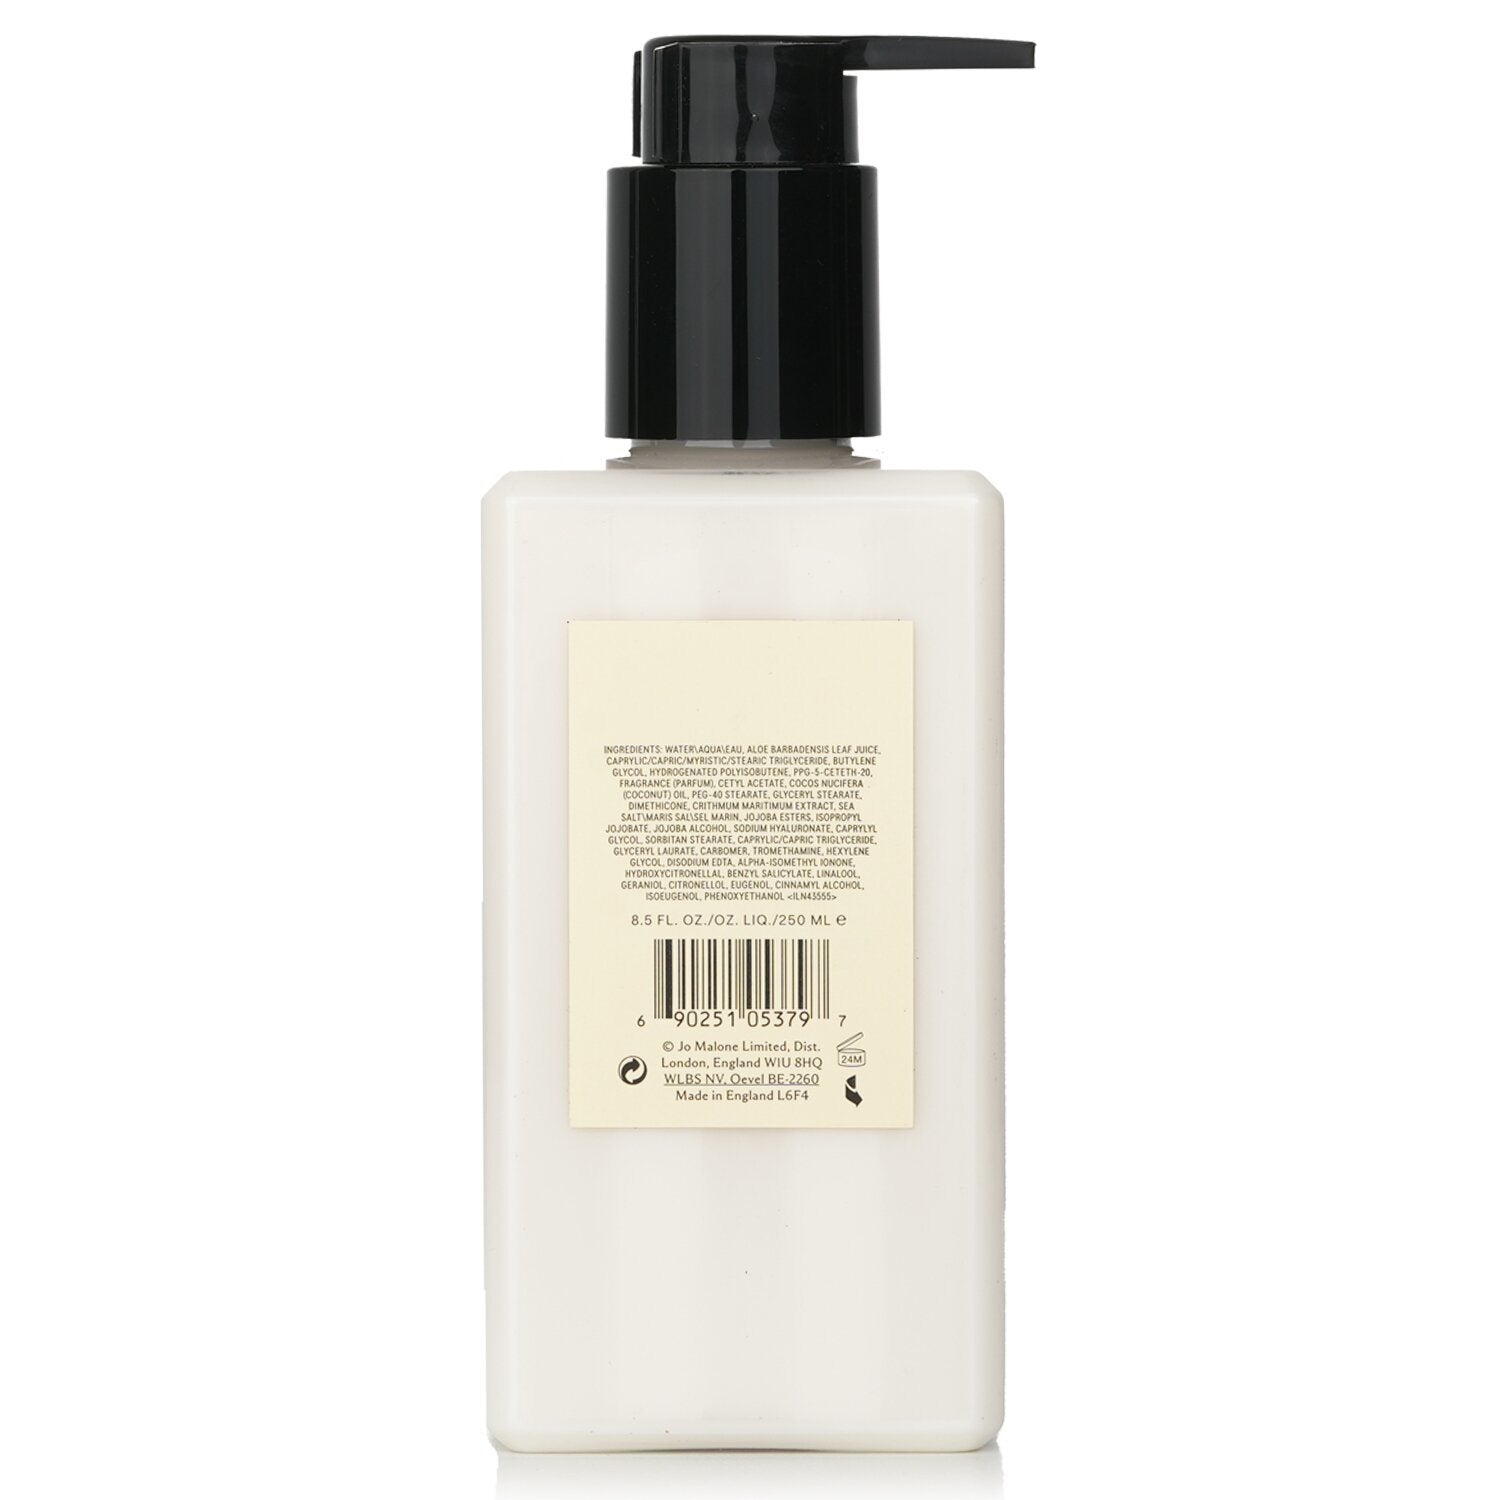 JO MALONE - Peony & Blush Suede Body & Hand Lotion (With Pump) 250ml/8.5oz 3P's Inclusive Beauty